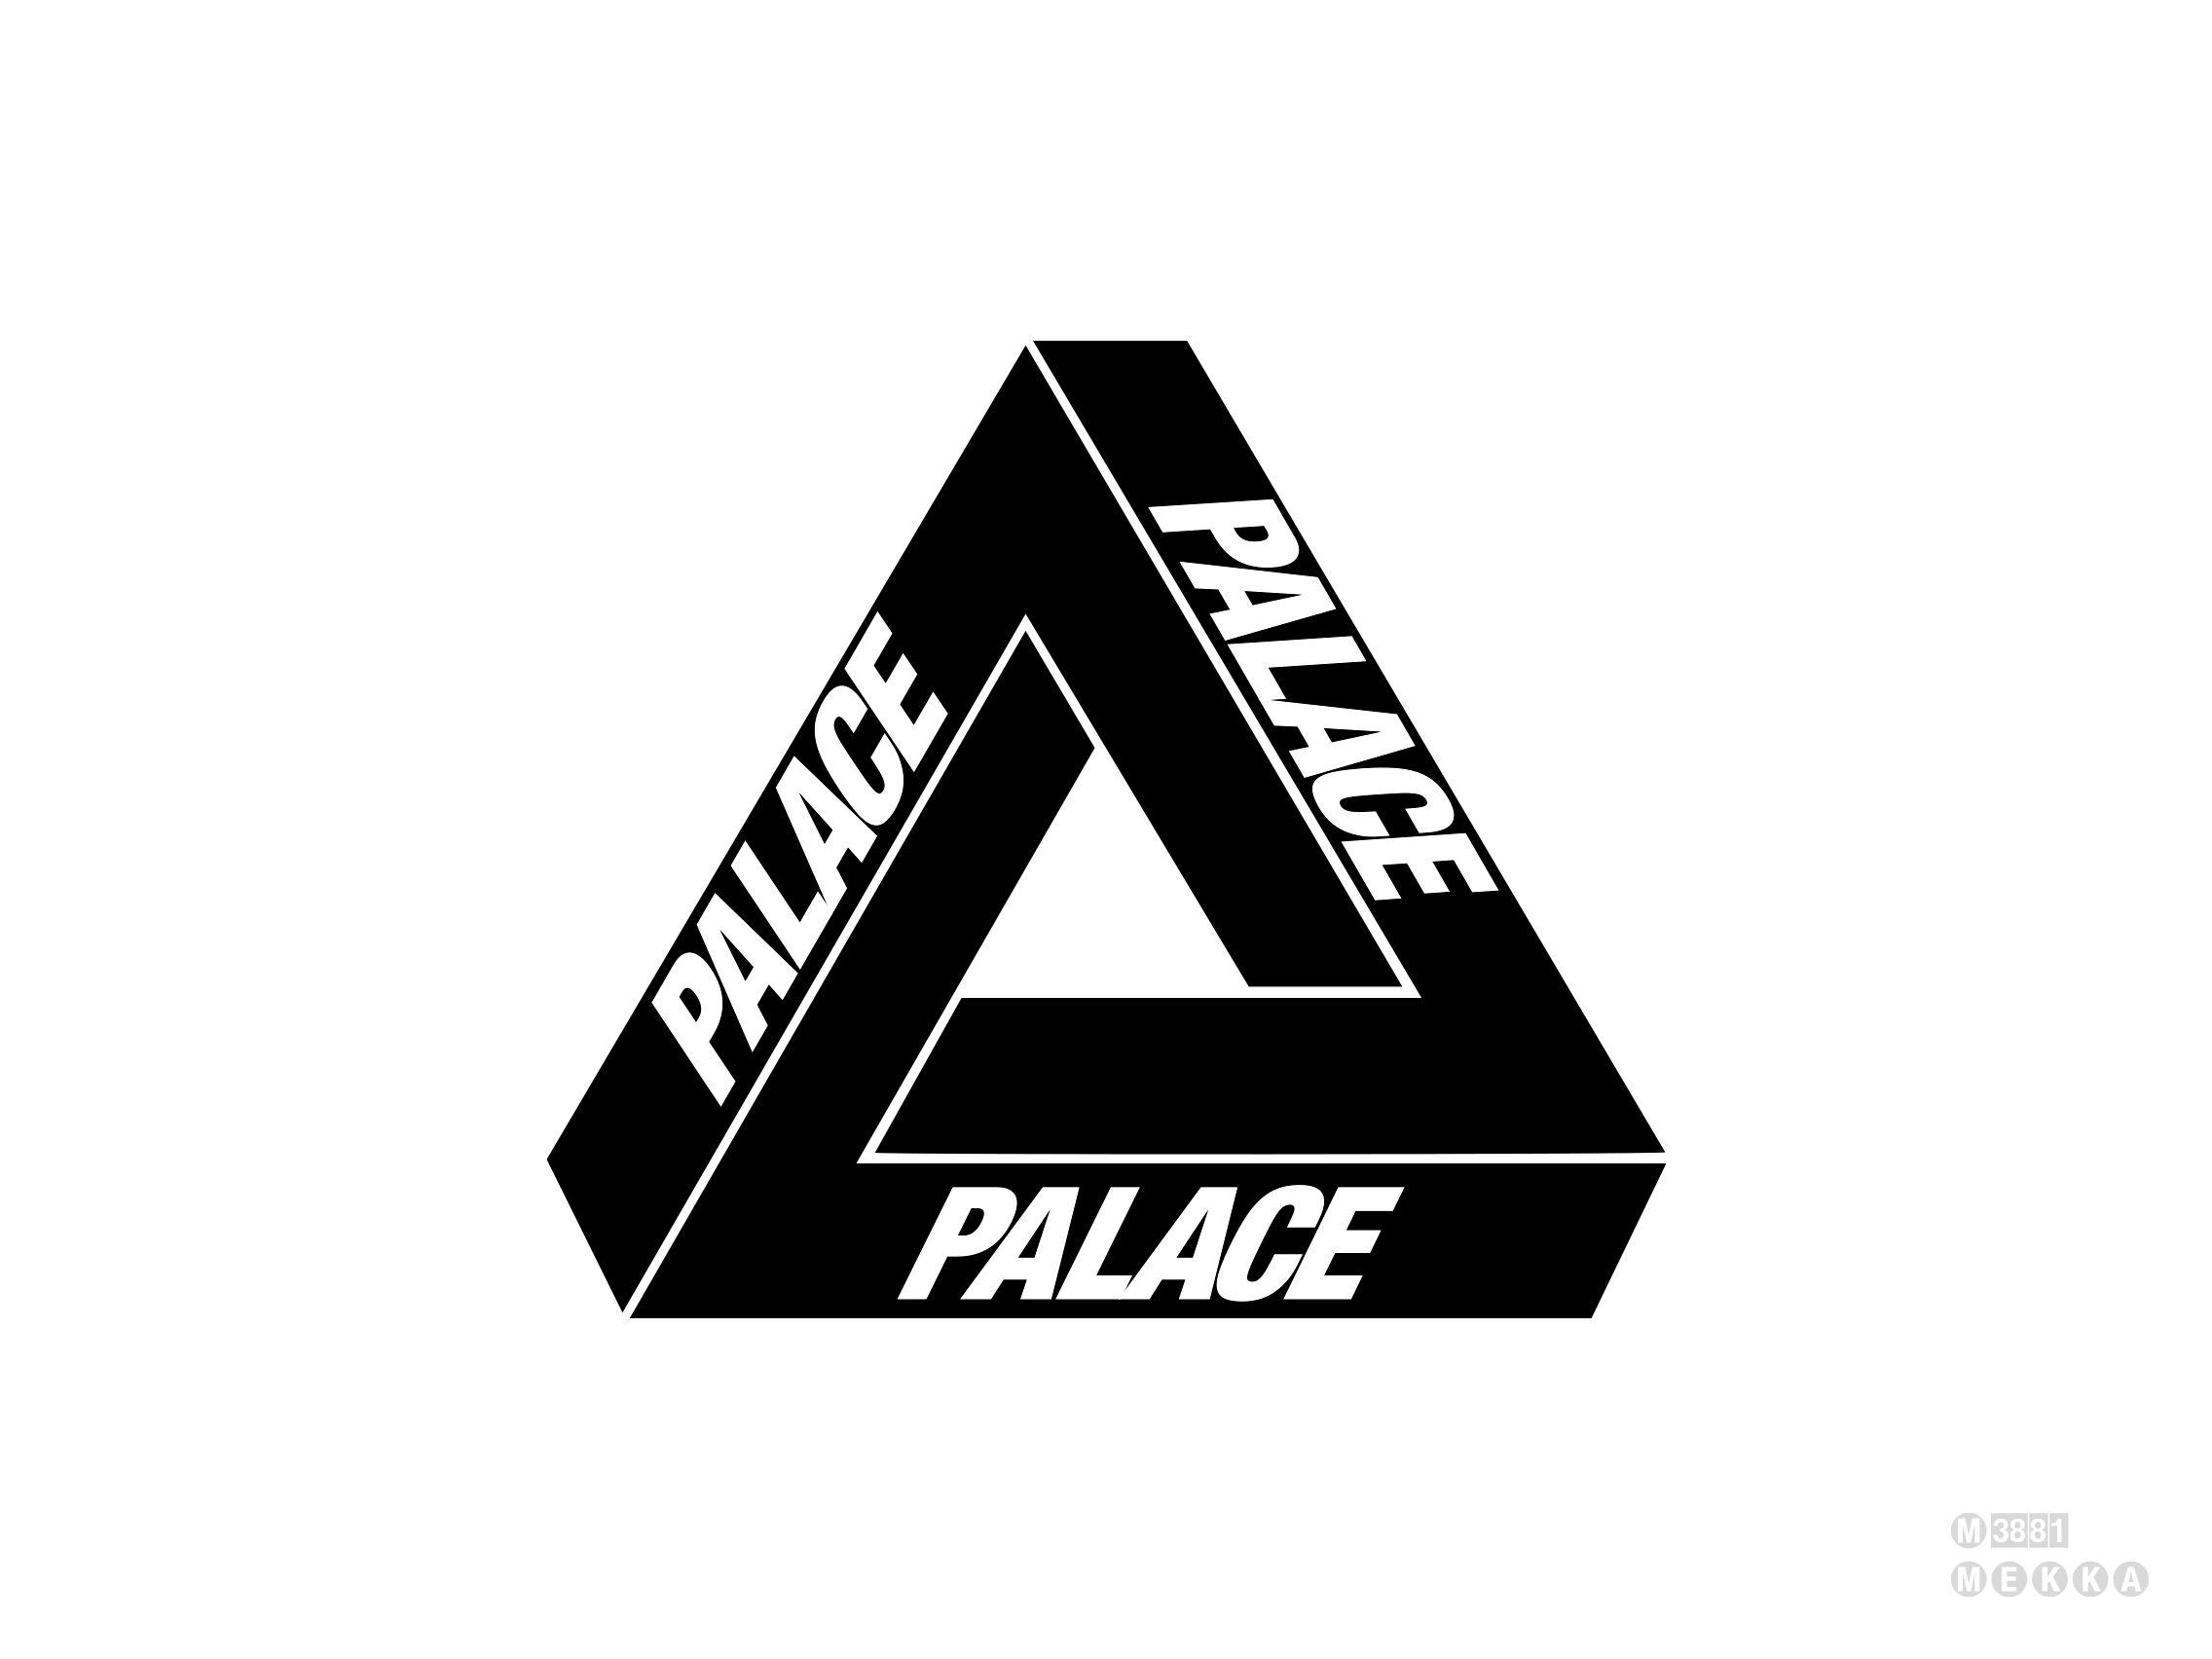 Palace Logo - Palace skateboards Vector (black and White please)